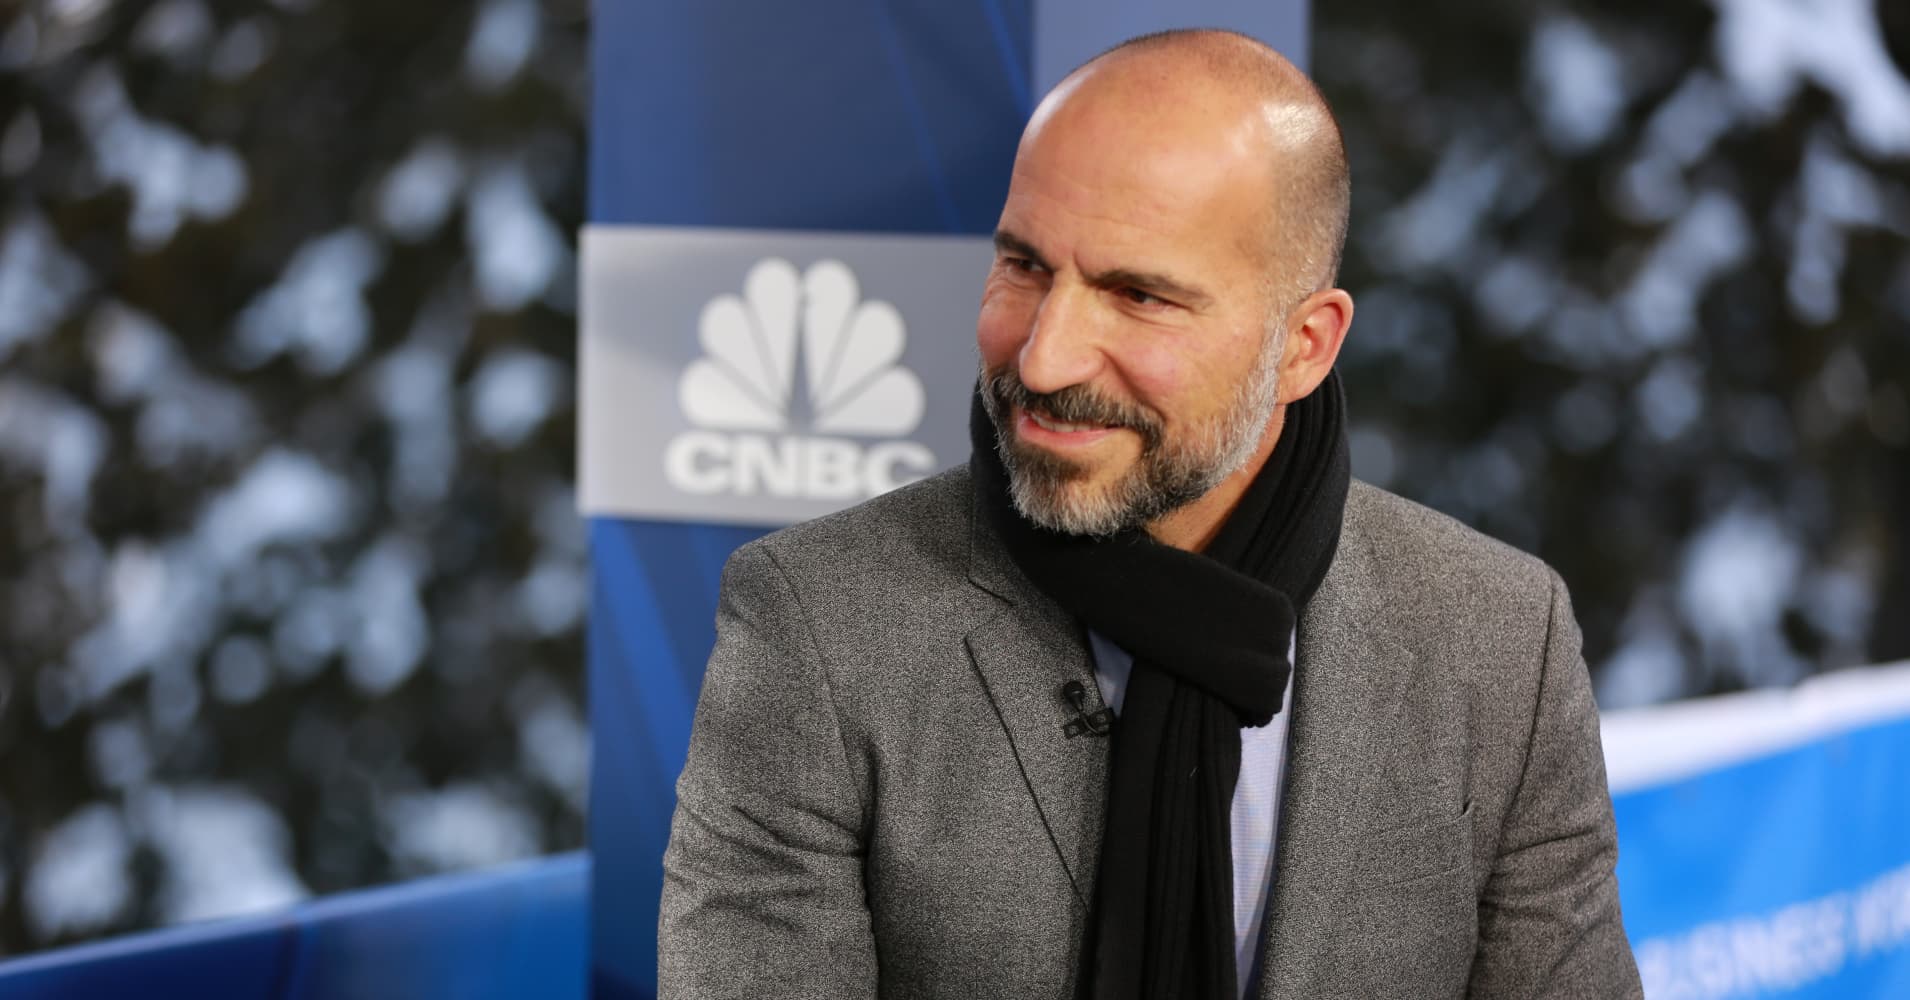 Uber will price shares tonight for its IPO — here's what to expect